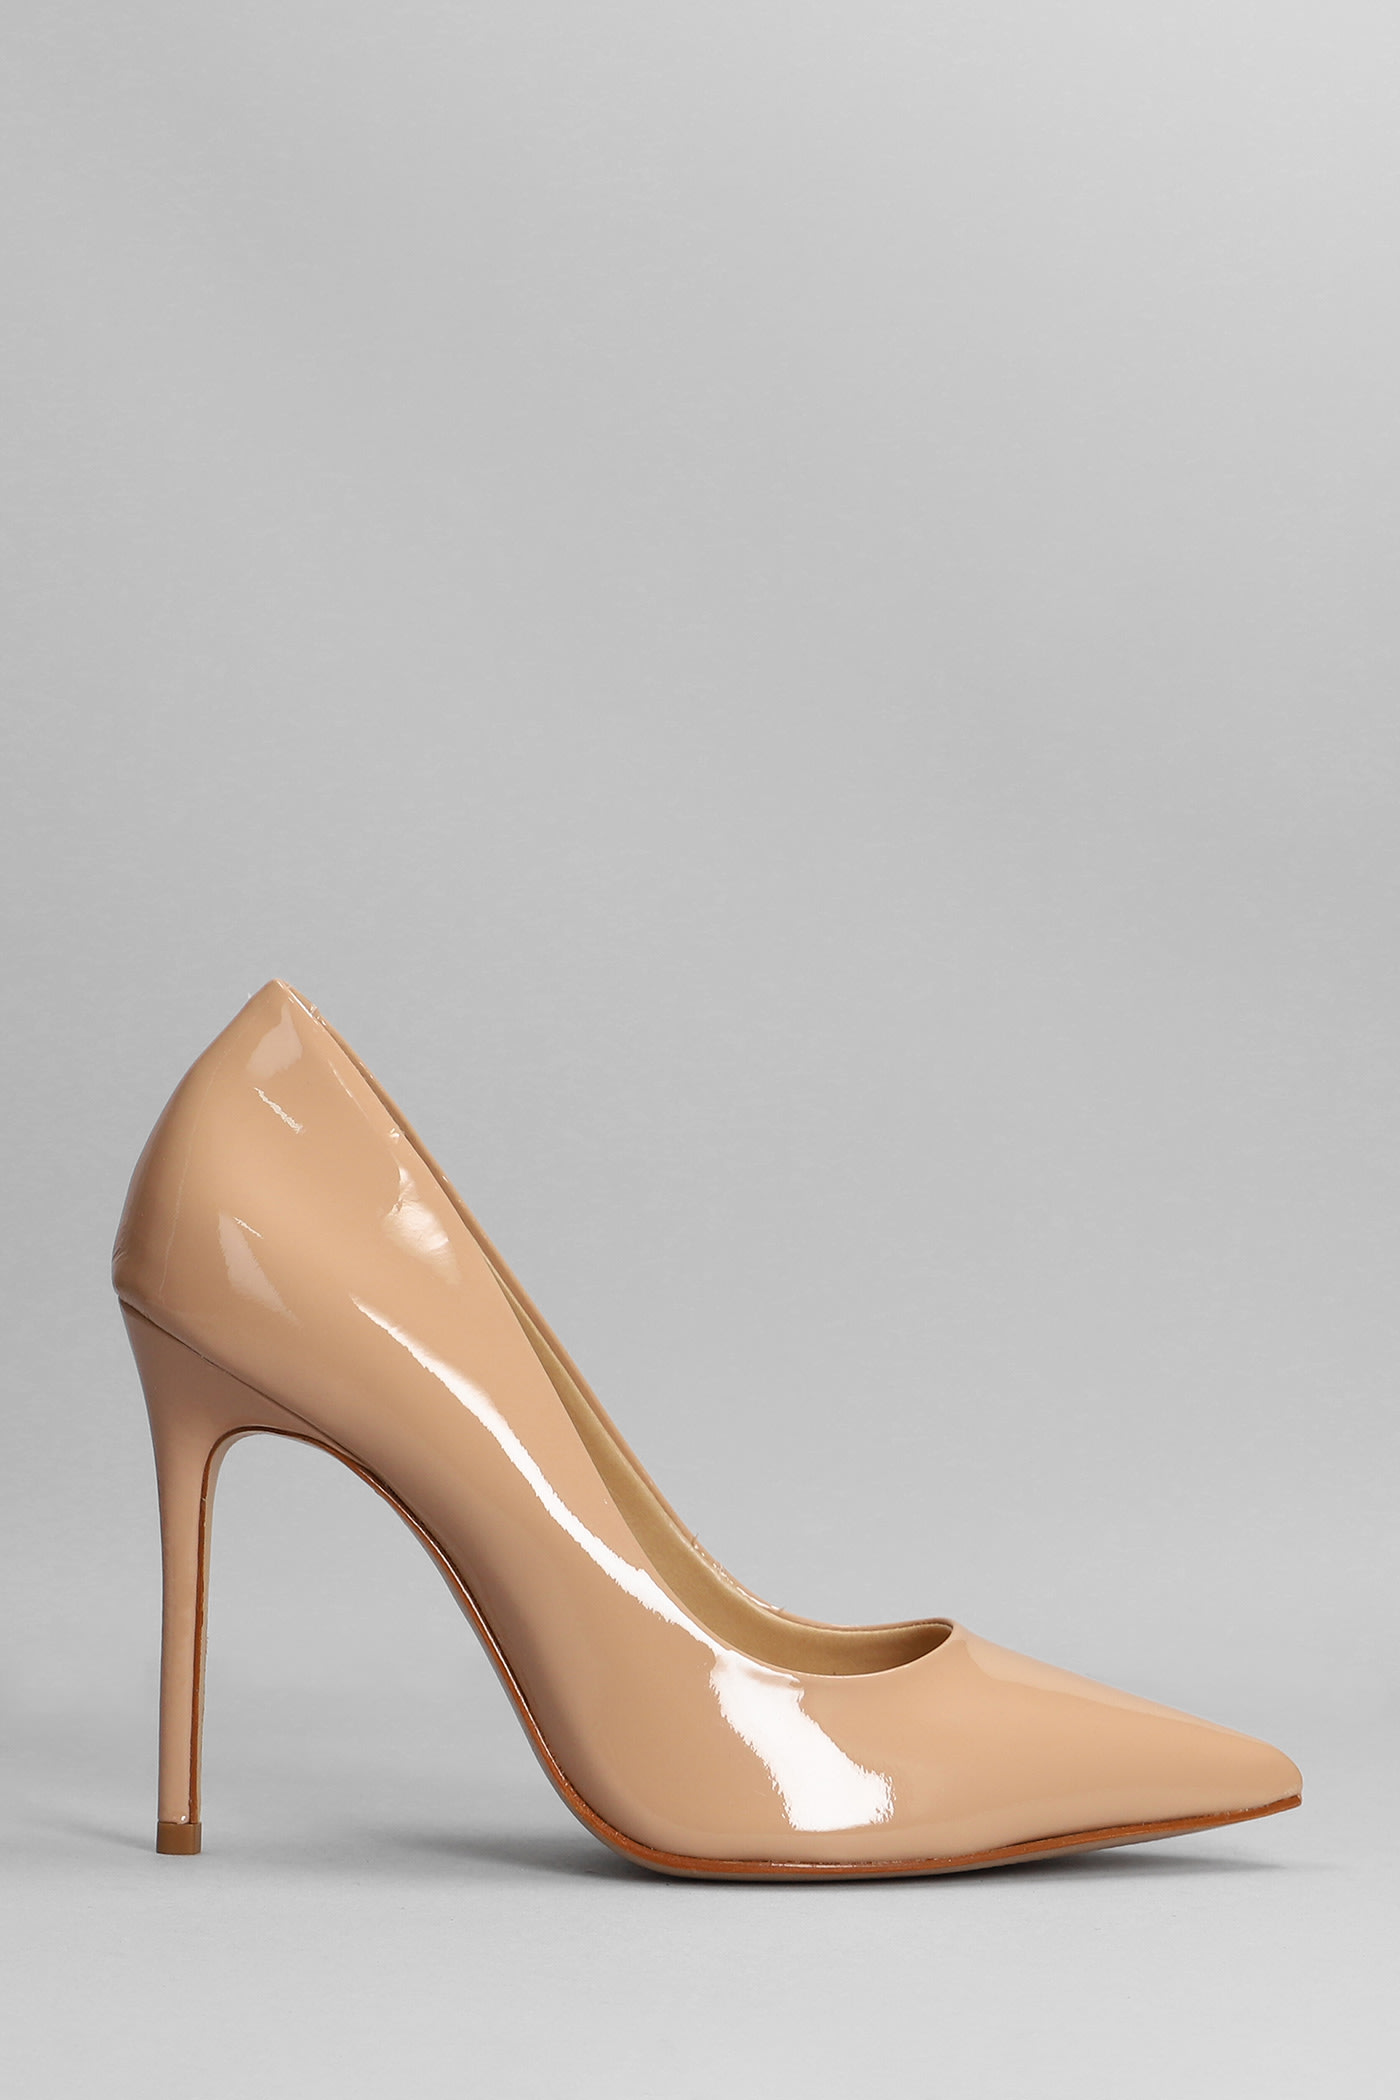 Schutz Pumps In Camel Patent Leather